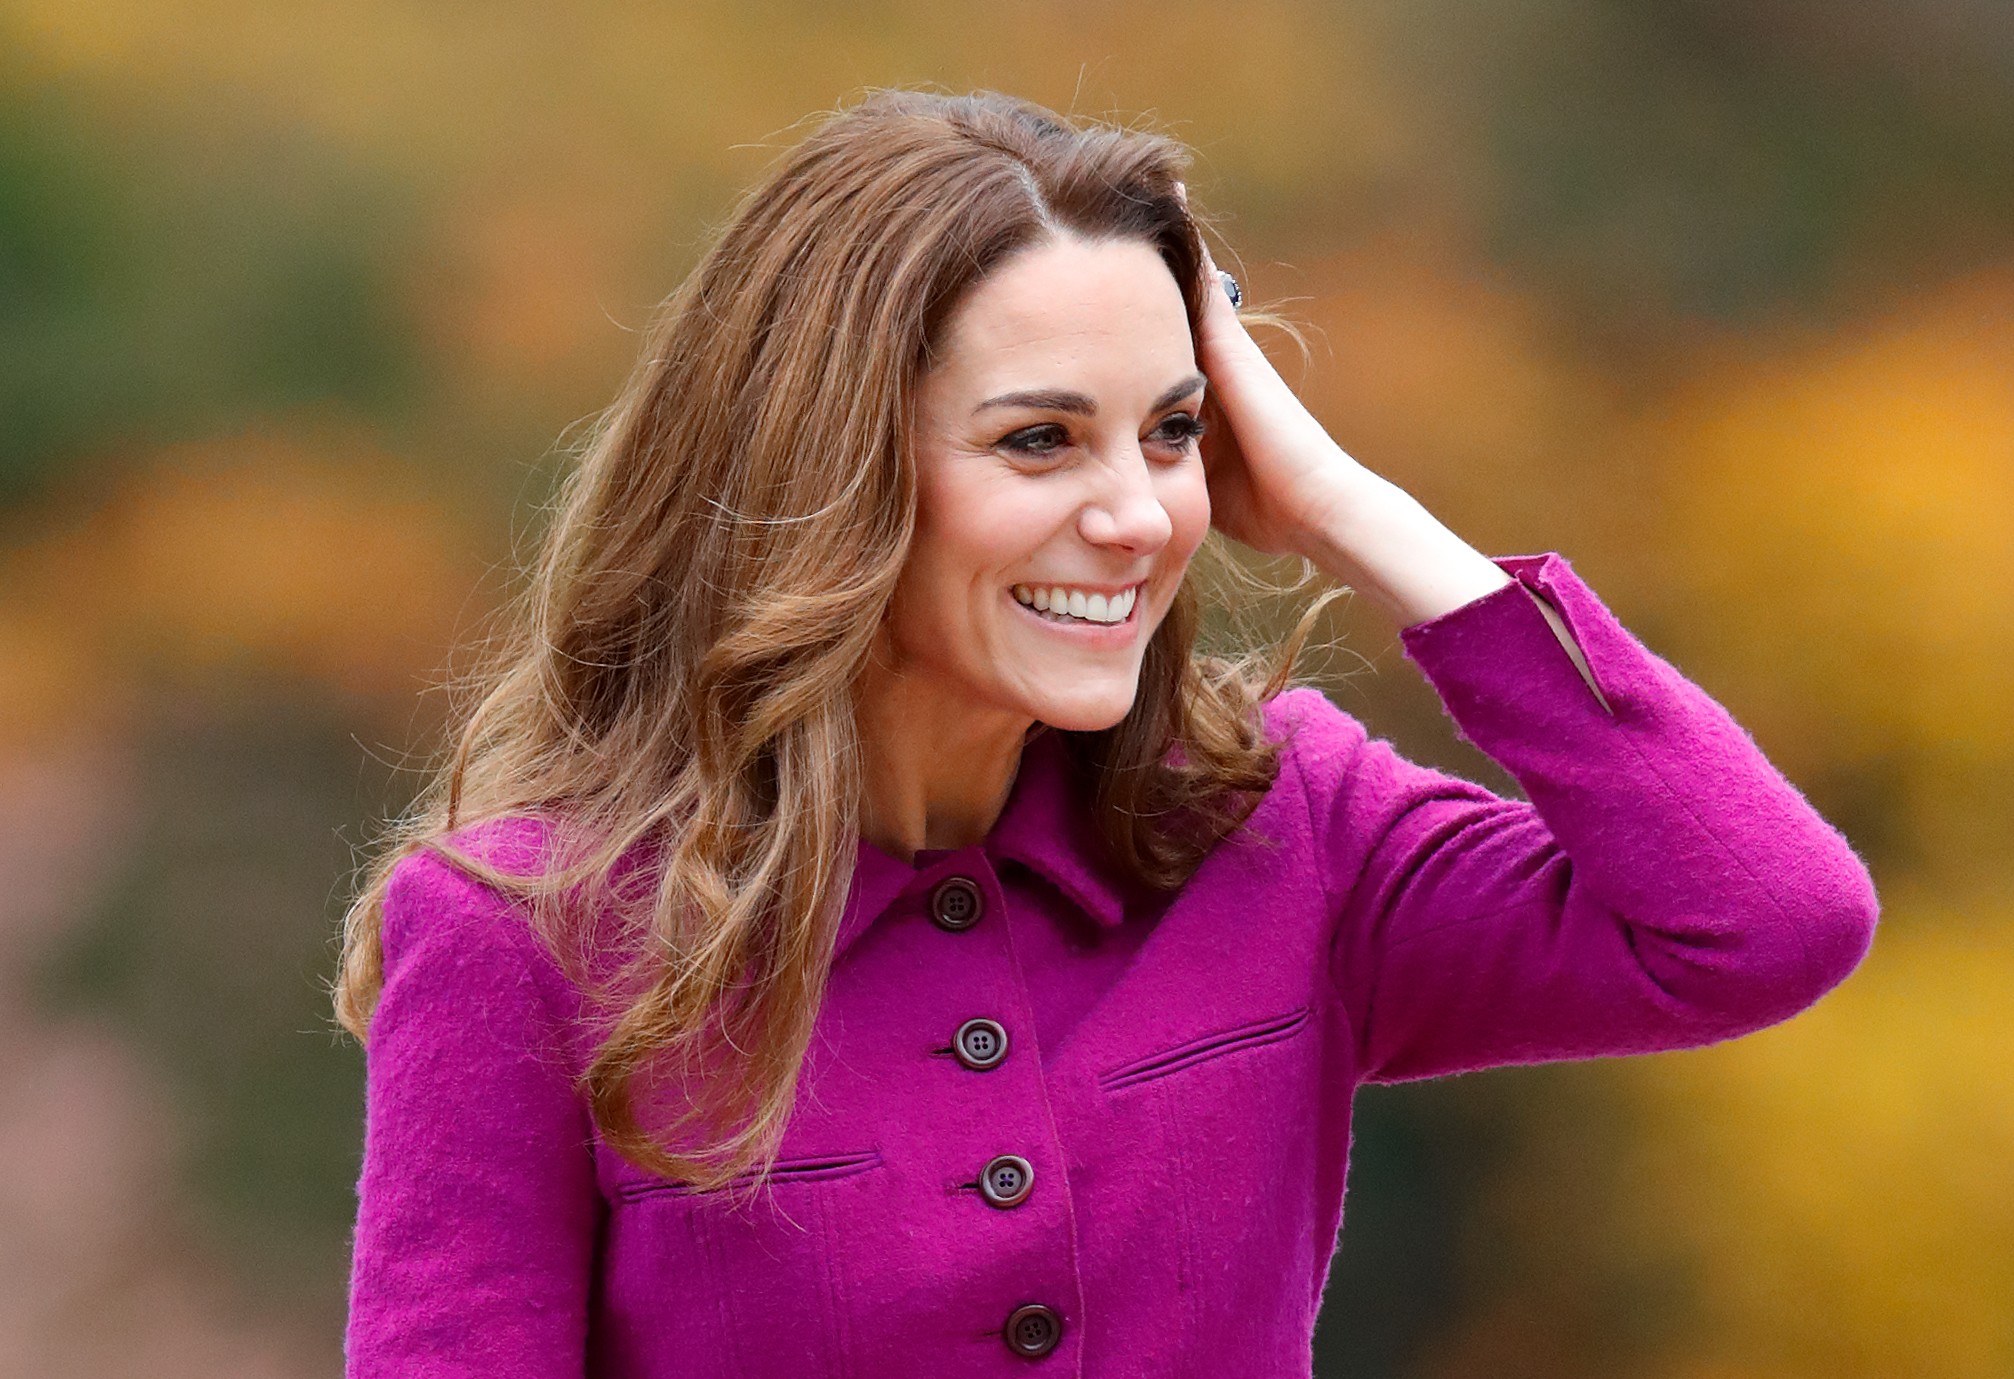 FRAMINGHAM EARL, NORFOLK - NOVEMBER 15: (EMBARGOED FOR PUBLICATION IN UK NEWSPAPERS UNTIL 24 HOURS AFTER CREATE DATE AND TIME) Catherine, Duchess of Cambridge arrives to open 'The Nook' Children's Hospice on November 15, 2019 in Framingham Earl, Norfolk.  (Foto: Getty Images)